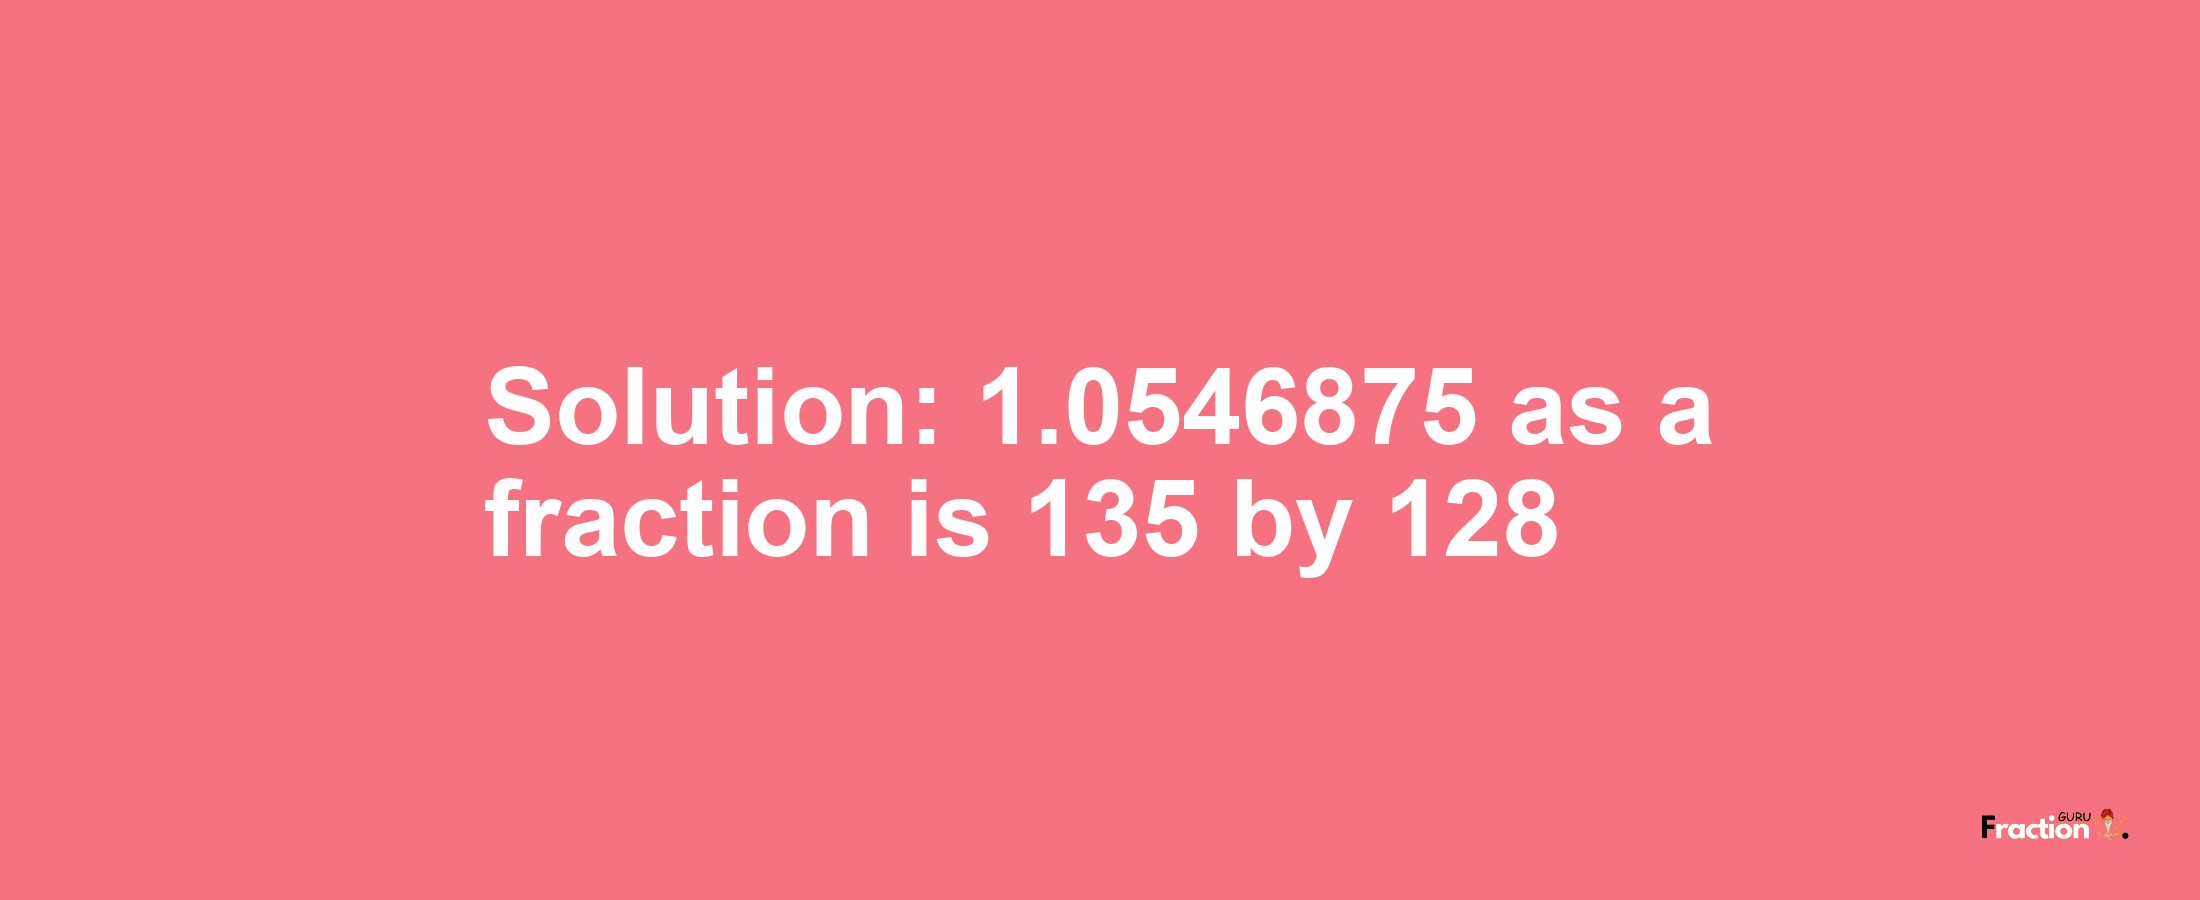 Solution:1.0546875 as a fraction is 135/128